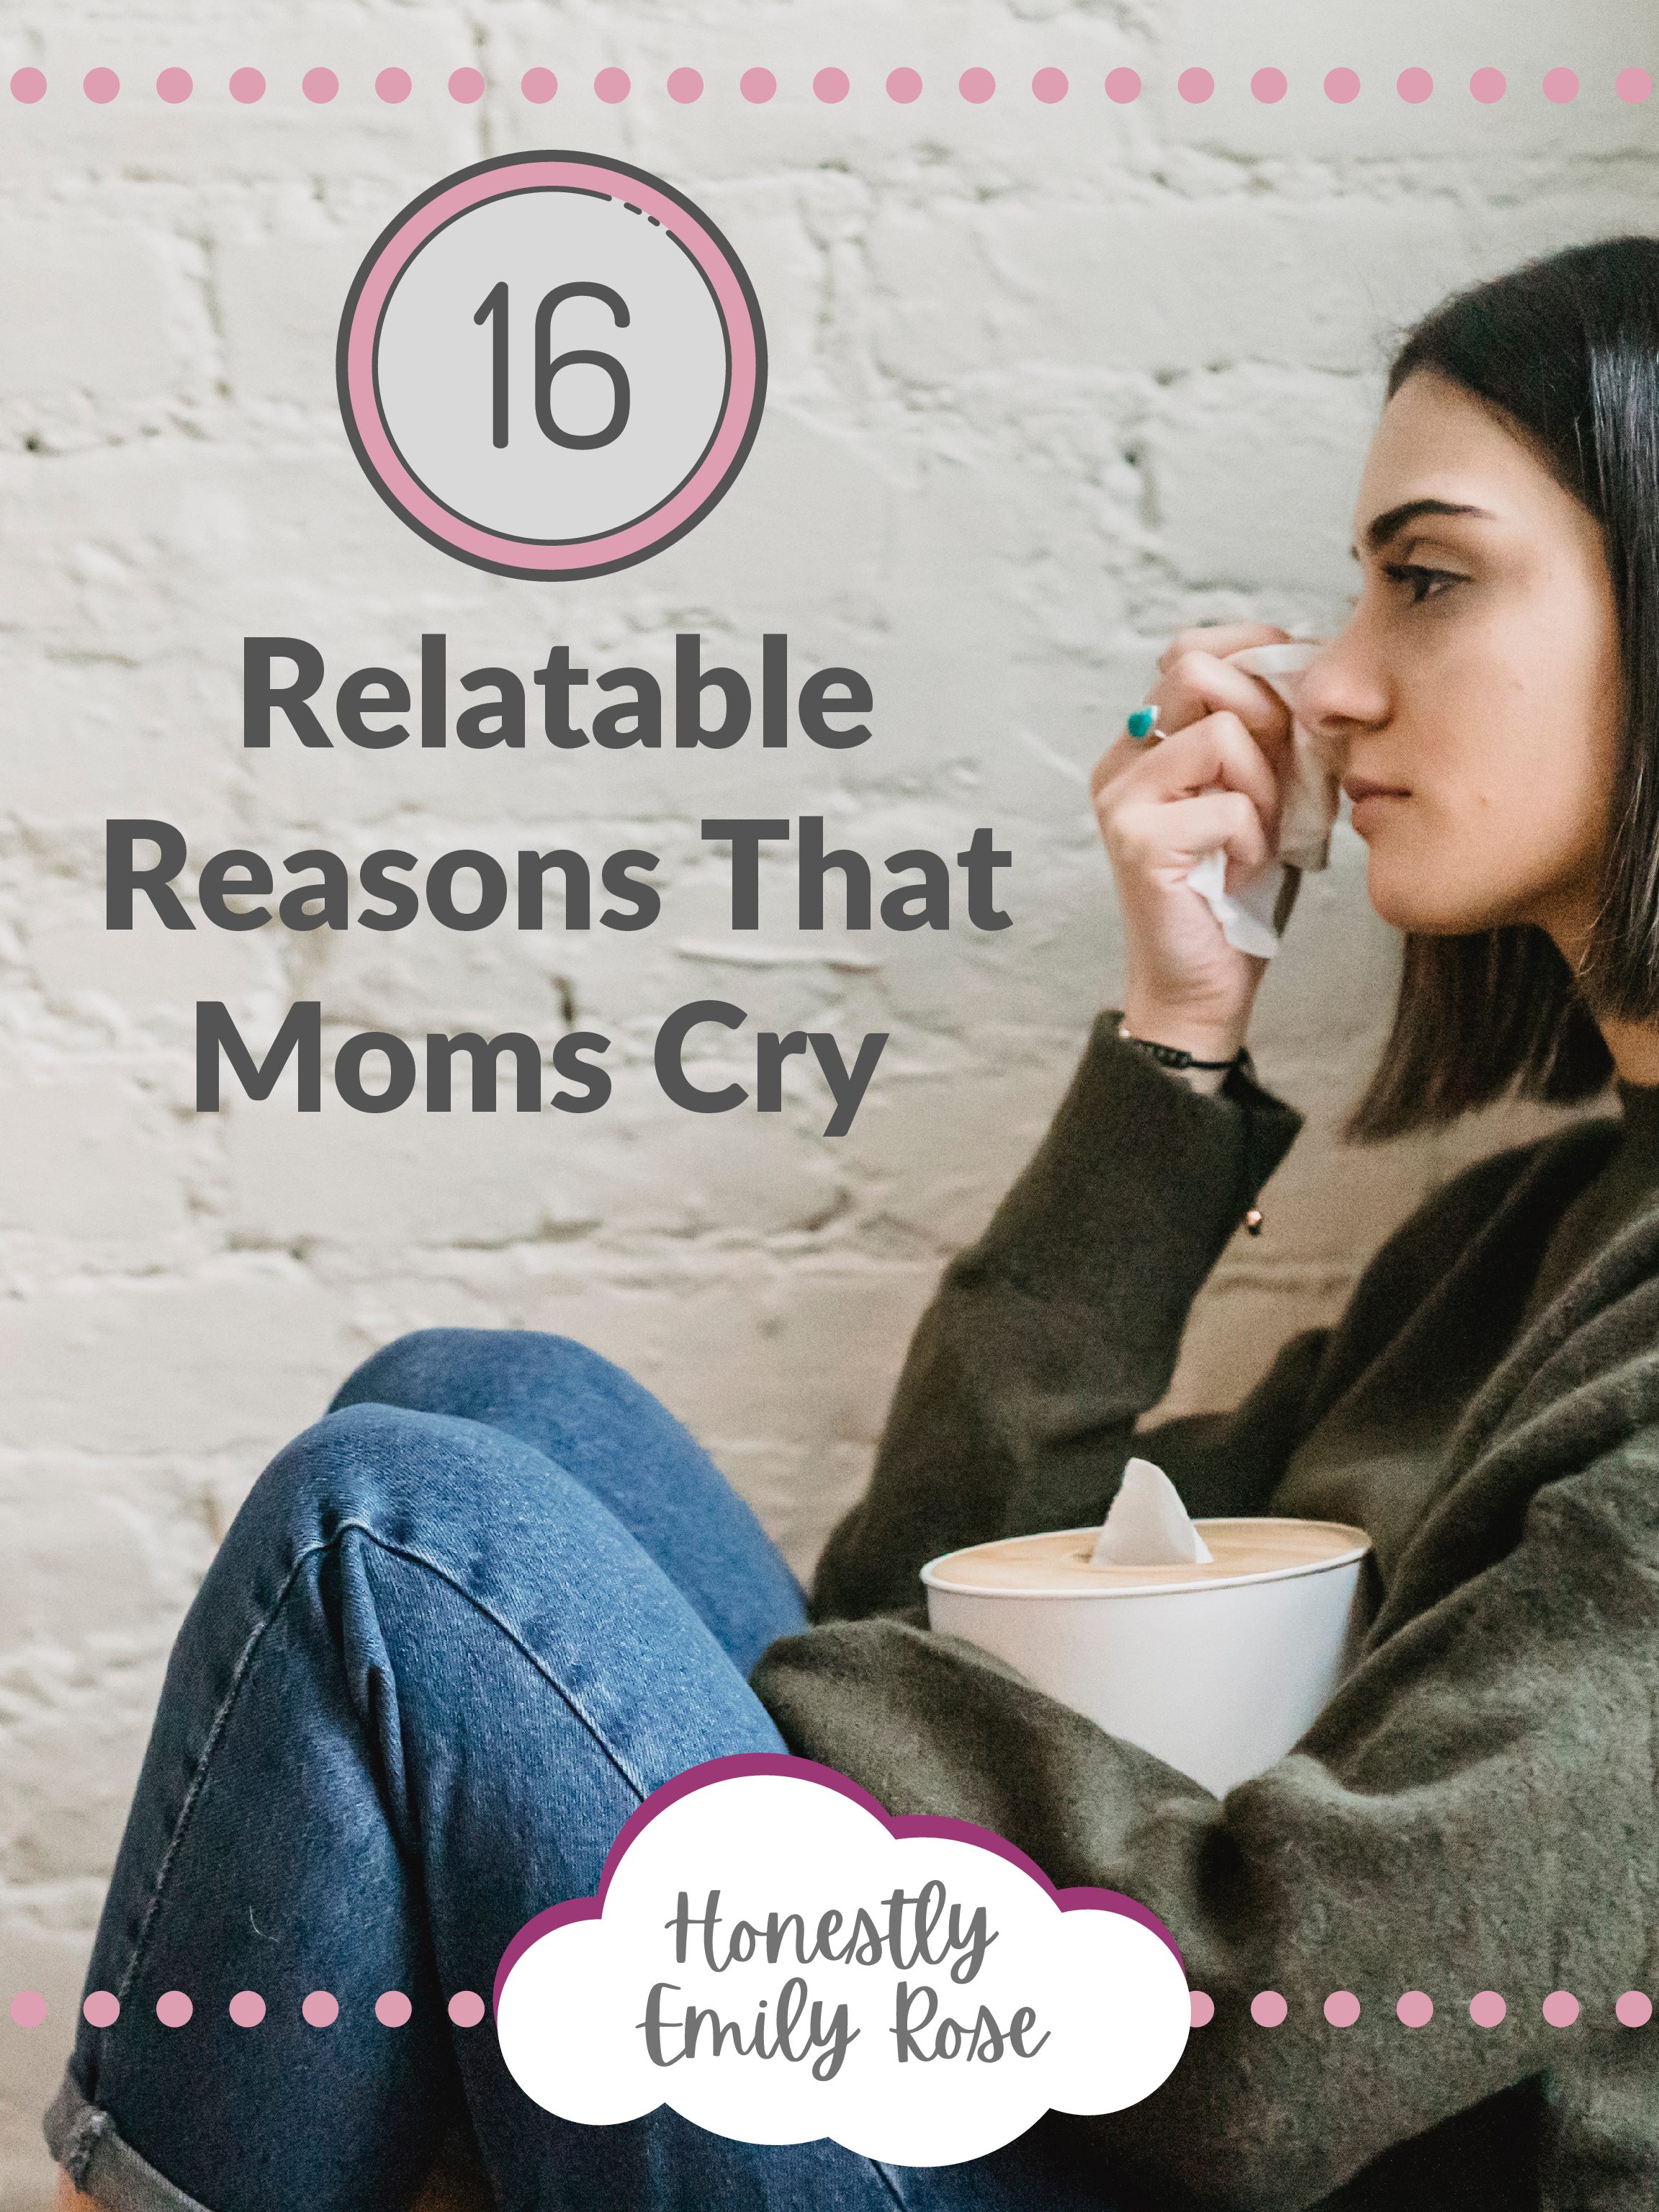 16 Relatable Reasons That Moms Cry